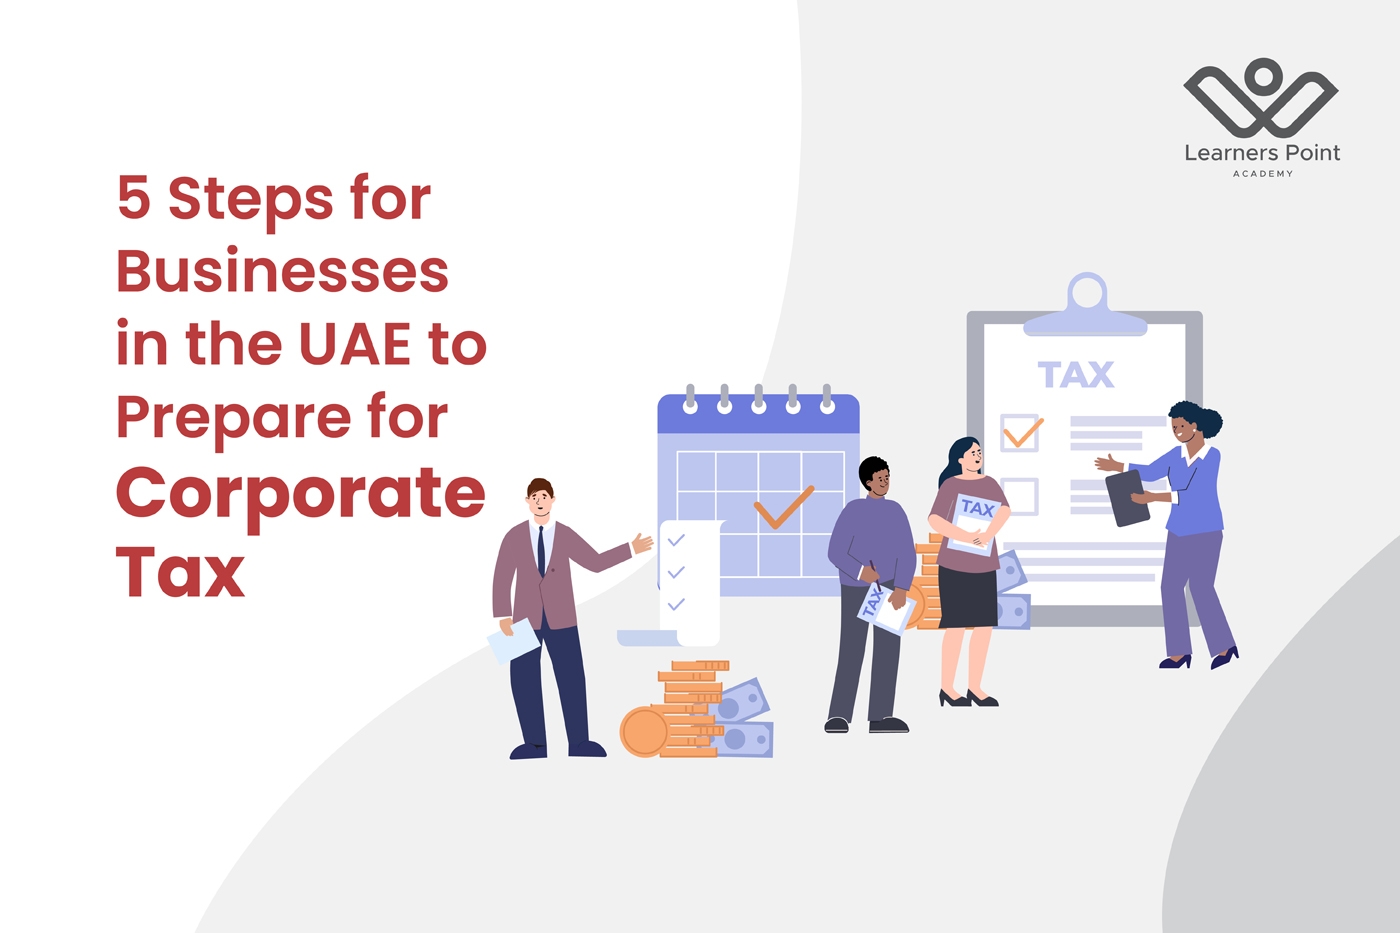 5 Steps for Businesses in the UAE to Prepare for Corporate Tax